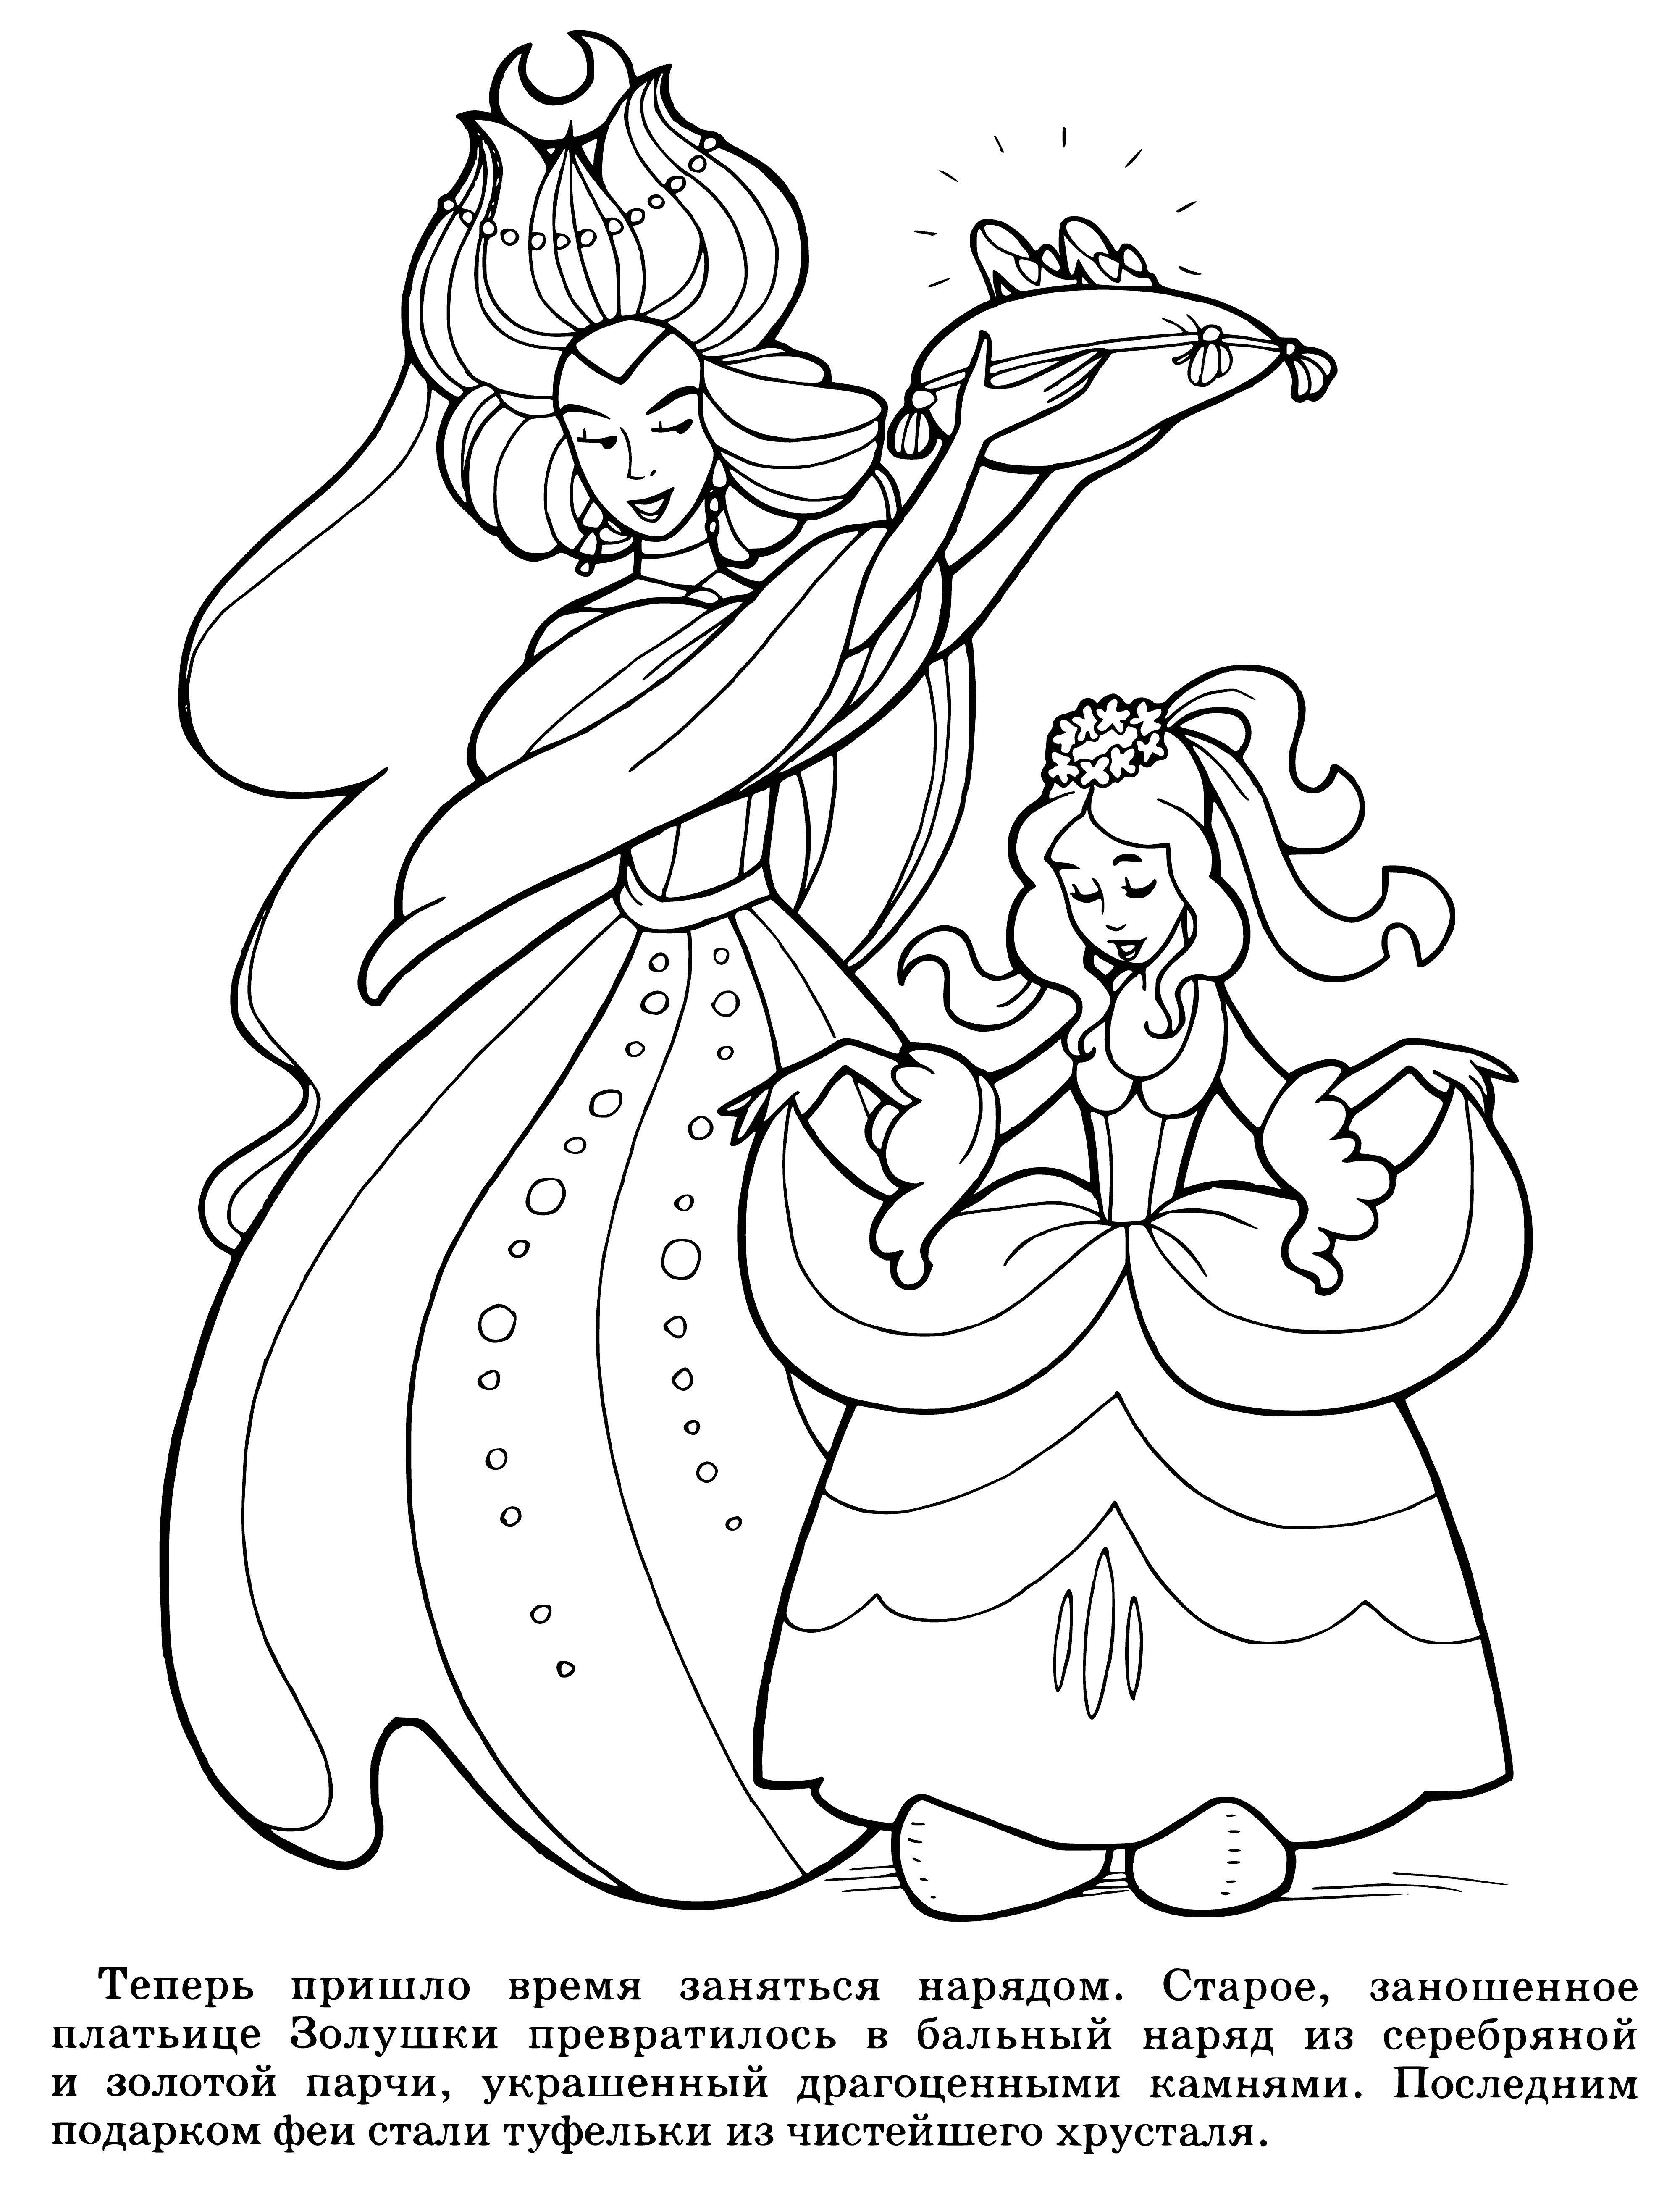 coloring page: Woman stands in front of mirror, holding a baby in blue; she wears blue dress w/white headscarf, reflecting her newfound joy & pride.